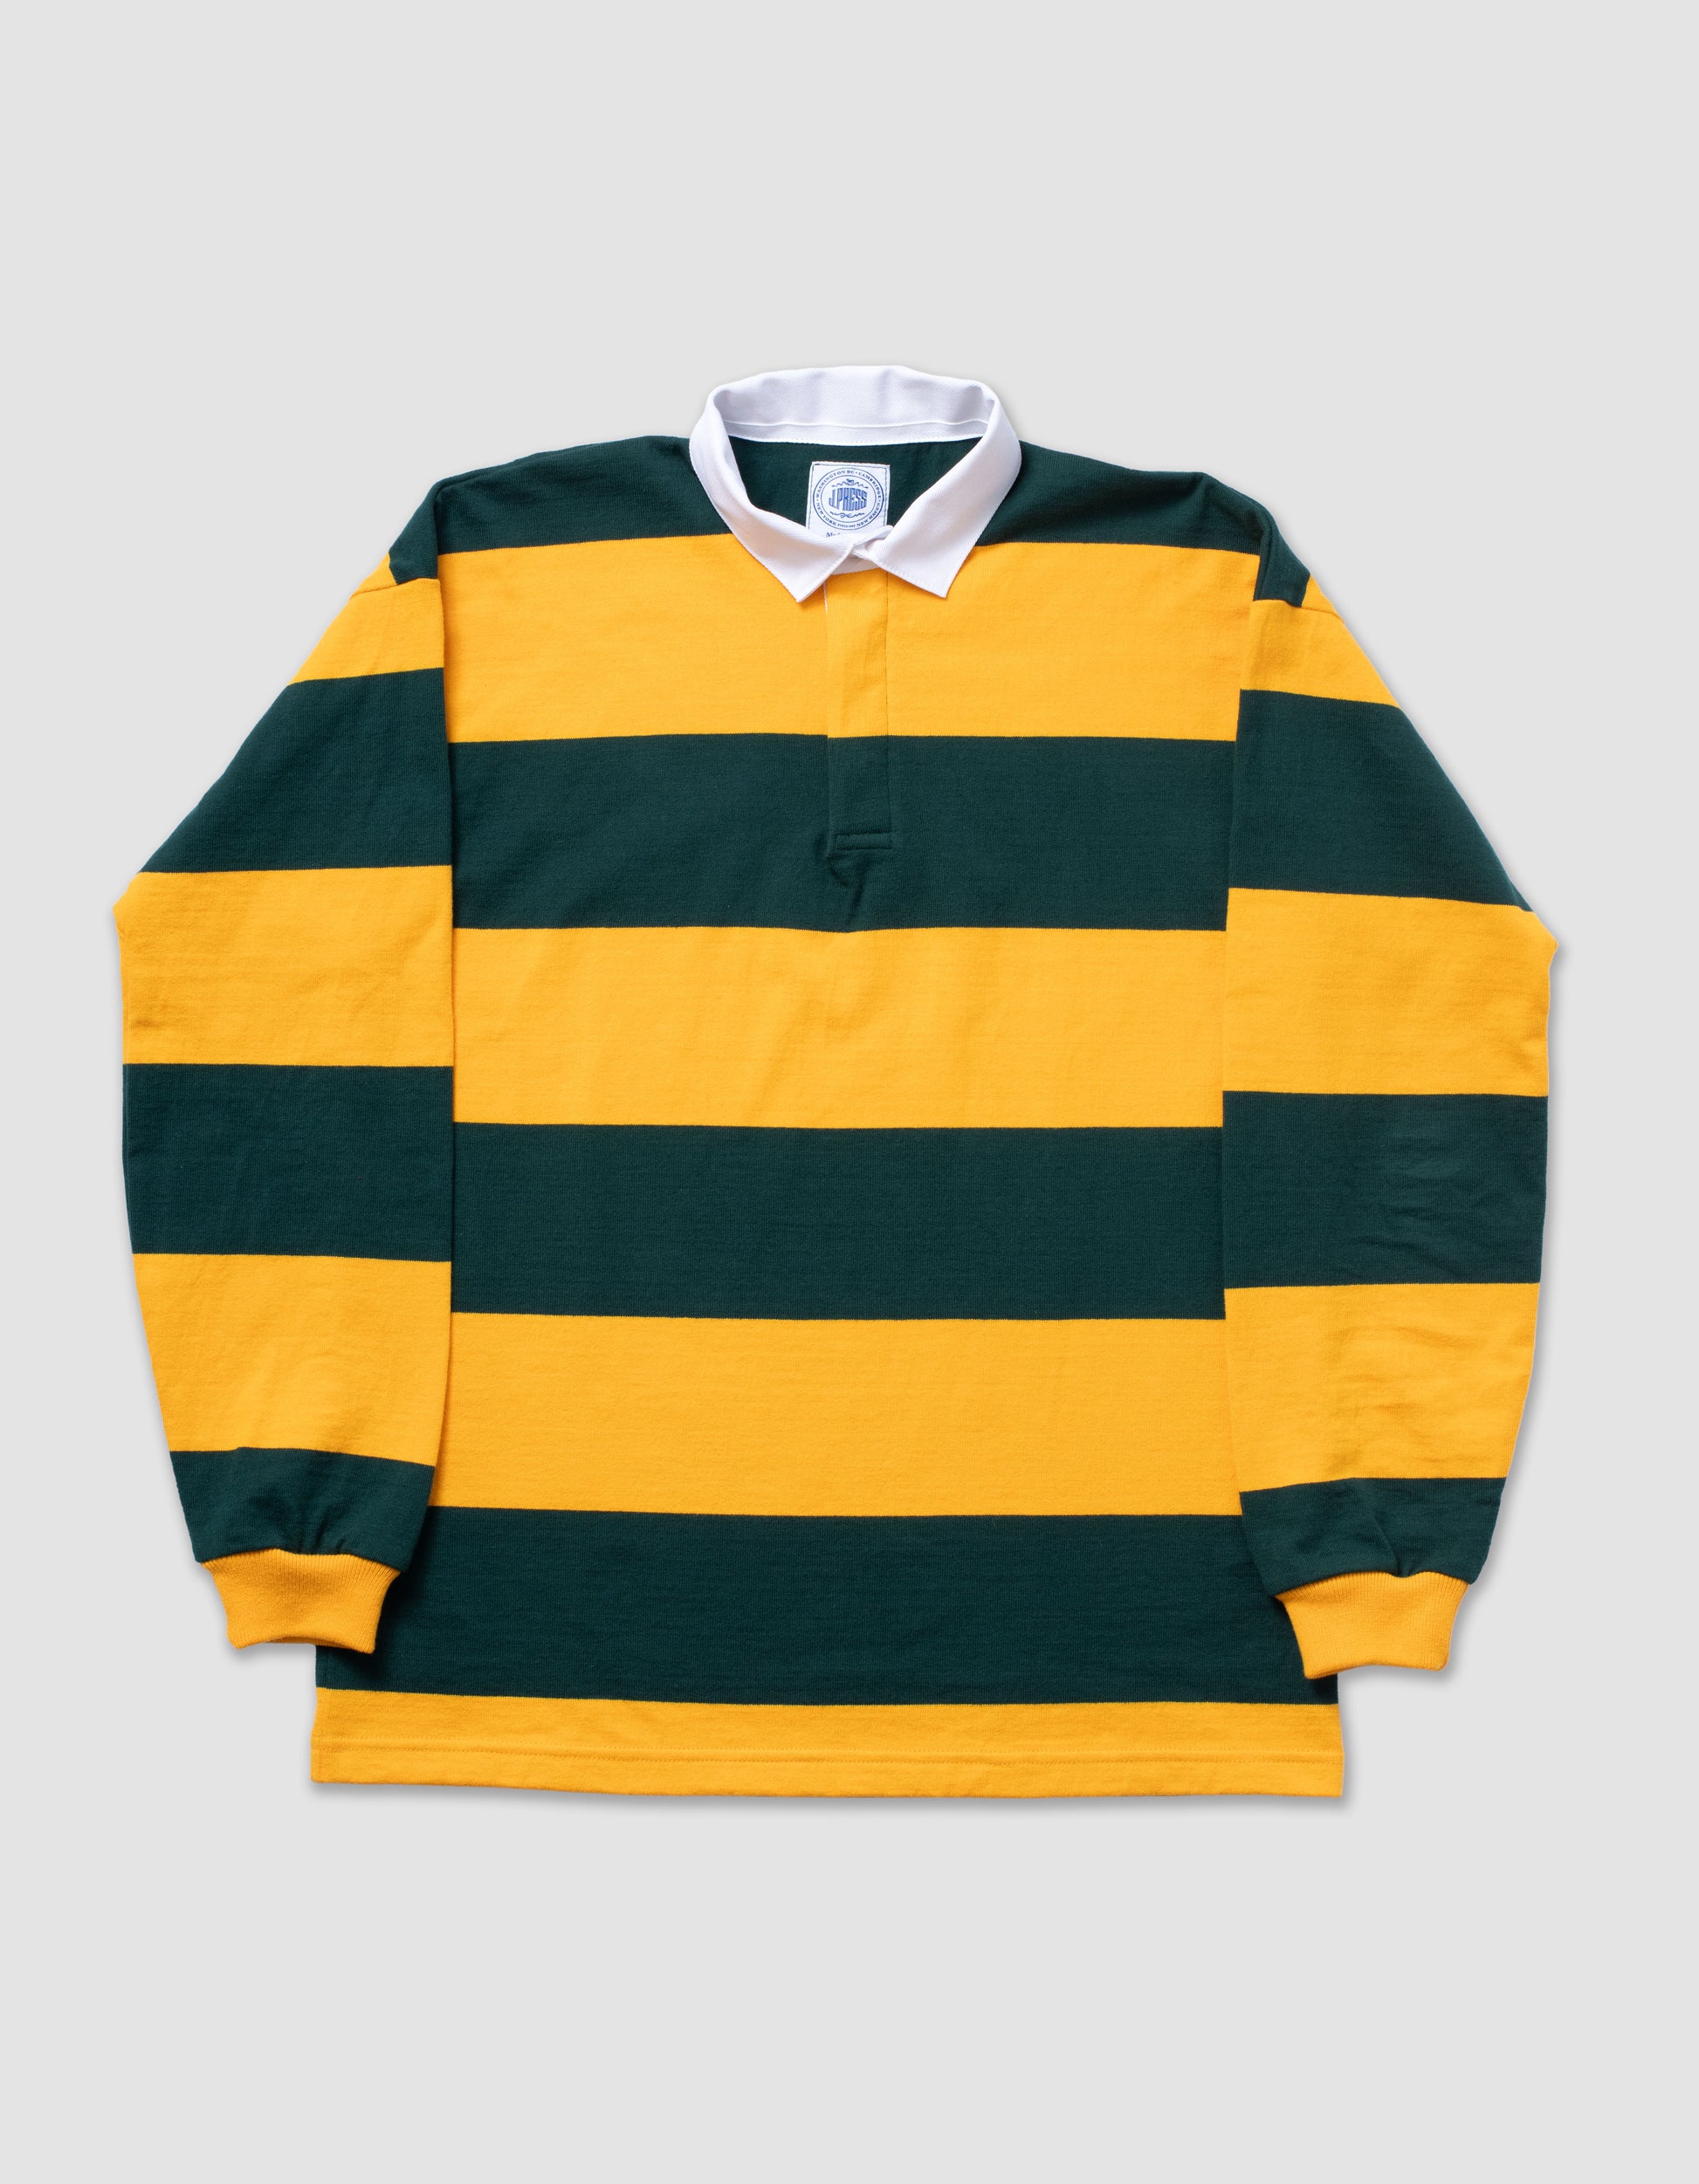 Classic Stripe Rugby Shirt in Gold & Evergreen| Men's Rugby Shirts – J ...